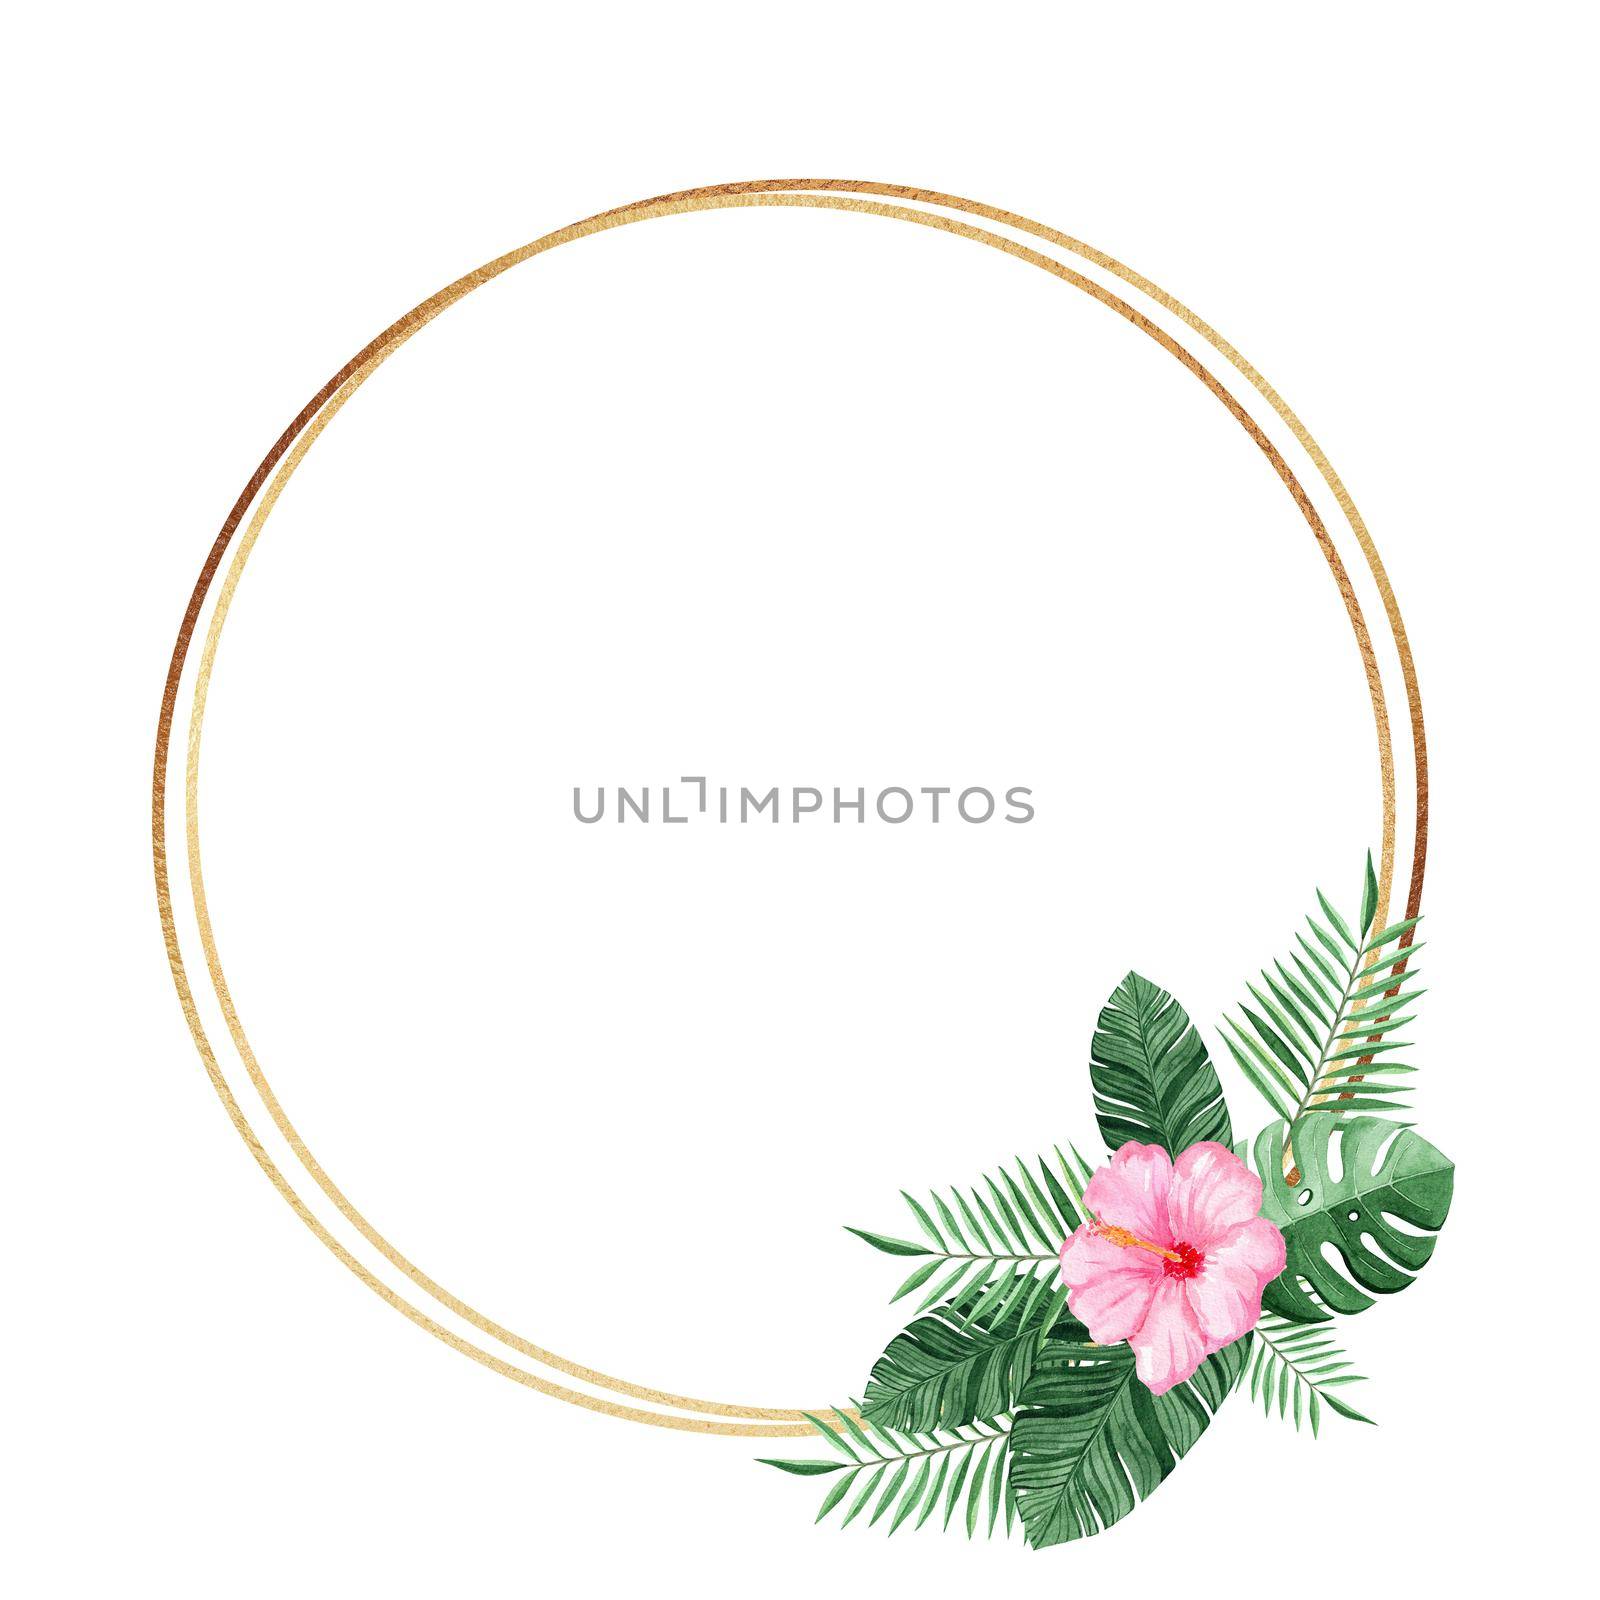 gold round frame with watercolor tropical flowers and leaves isolated on white background. For wedding invitations and cards design